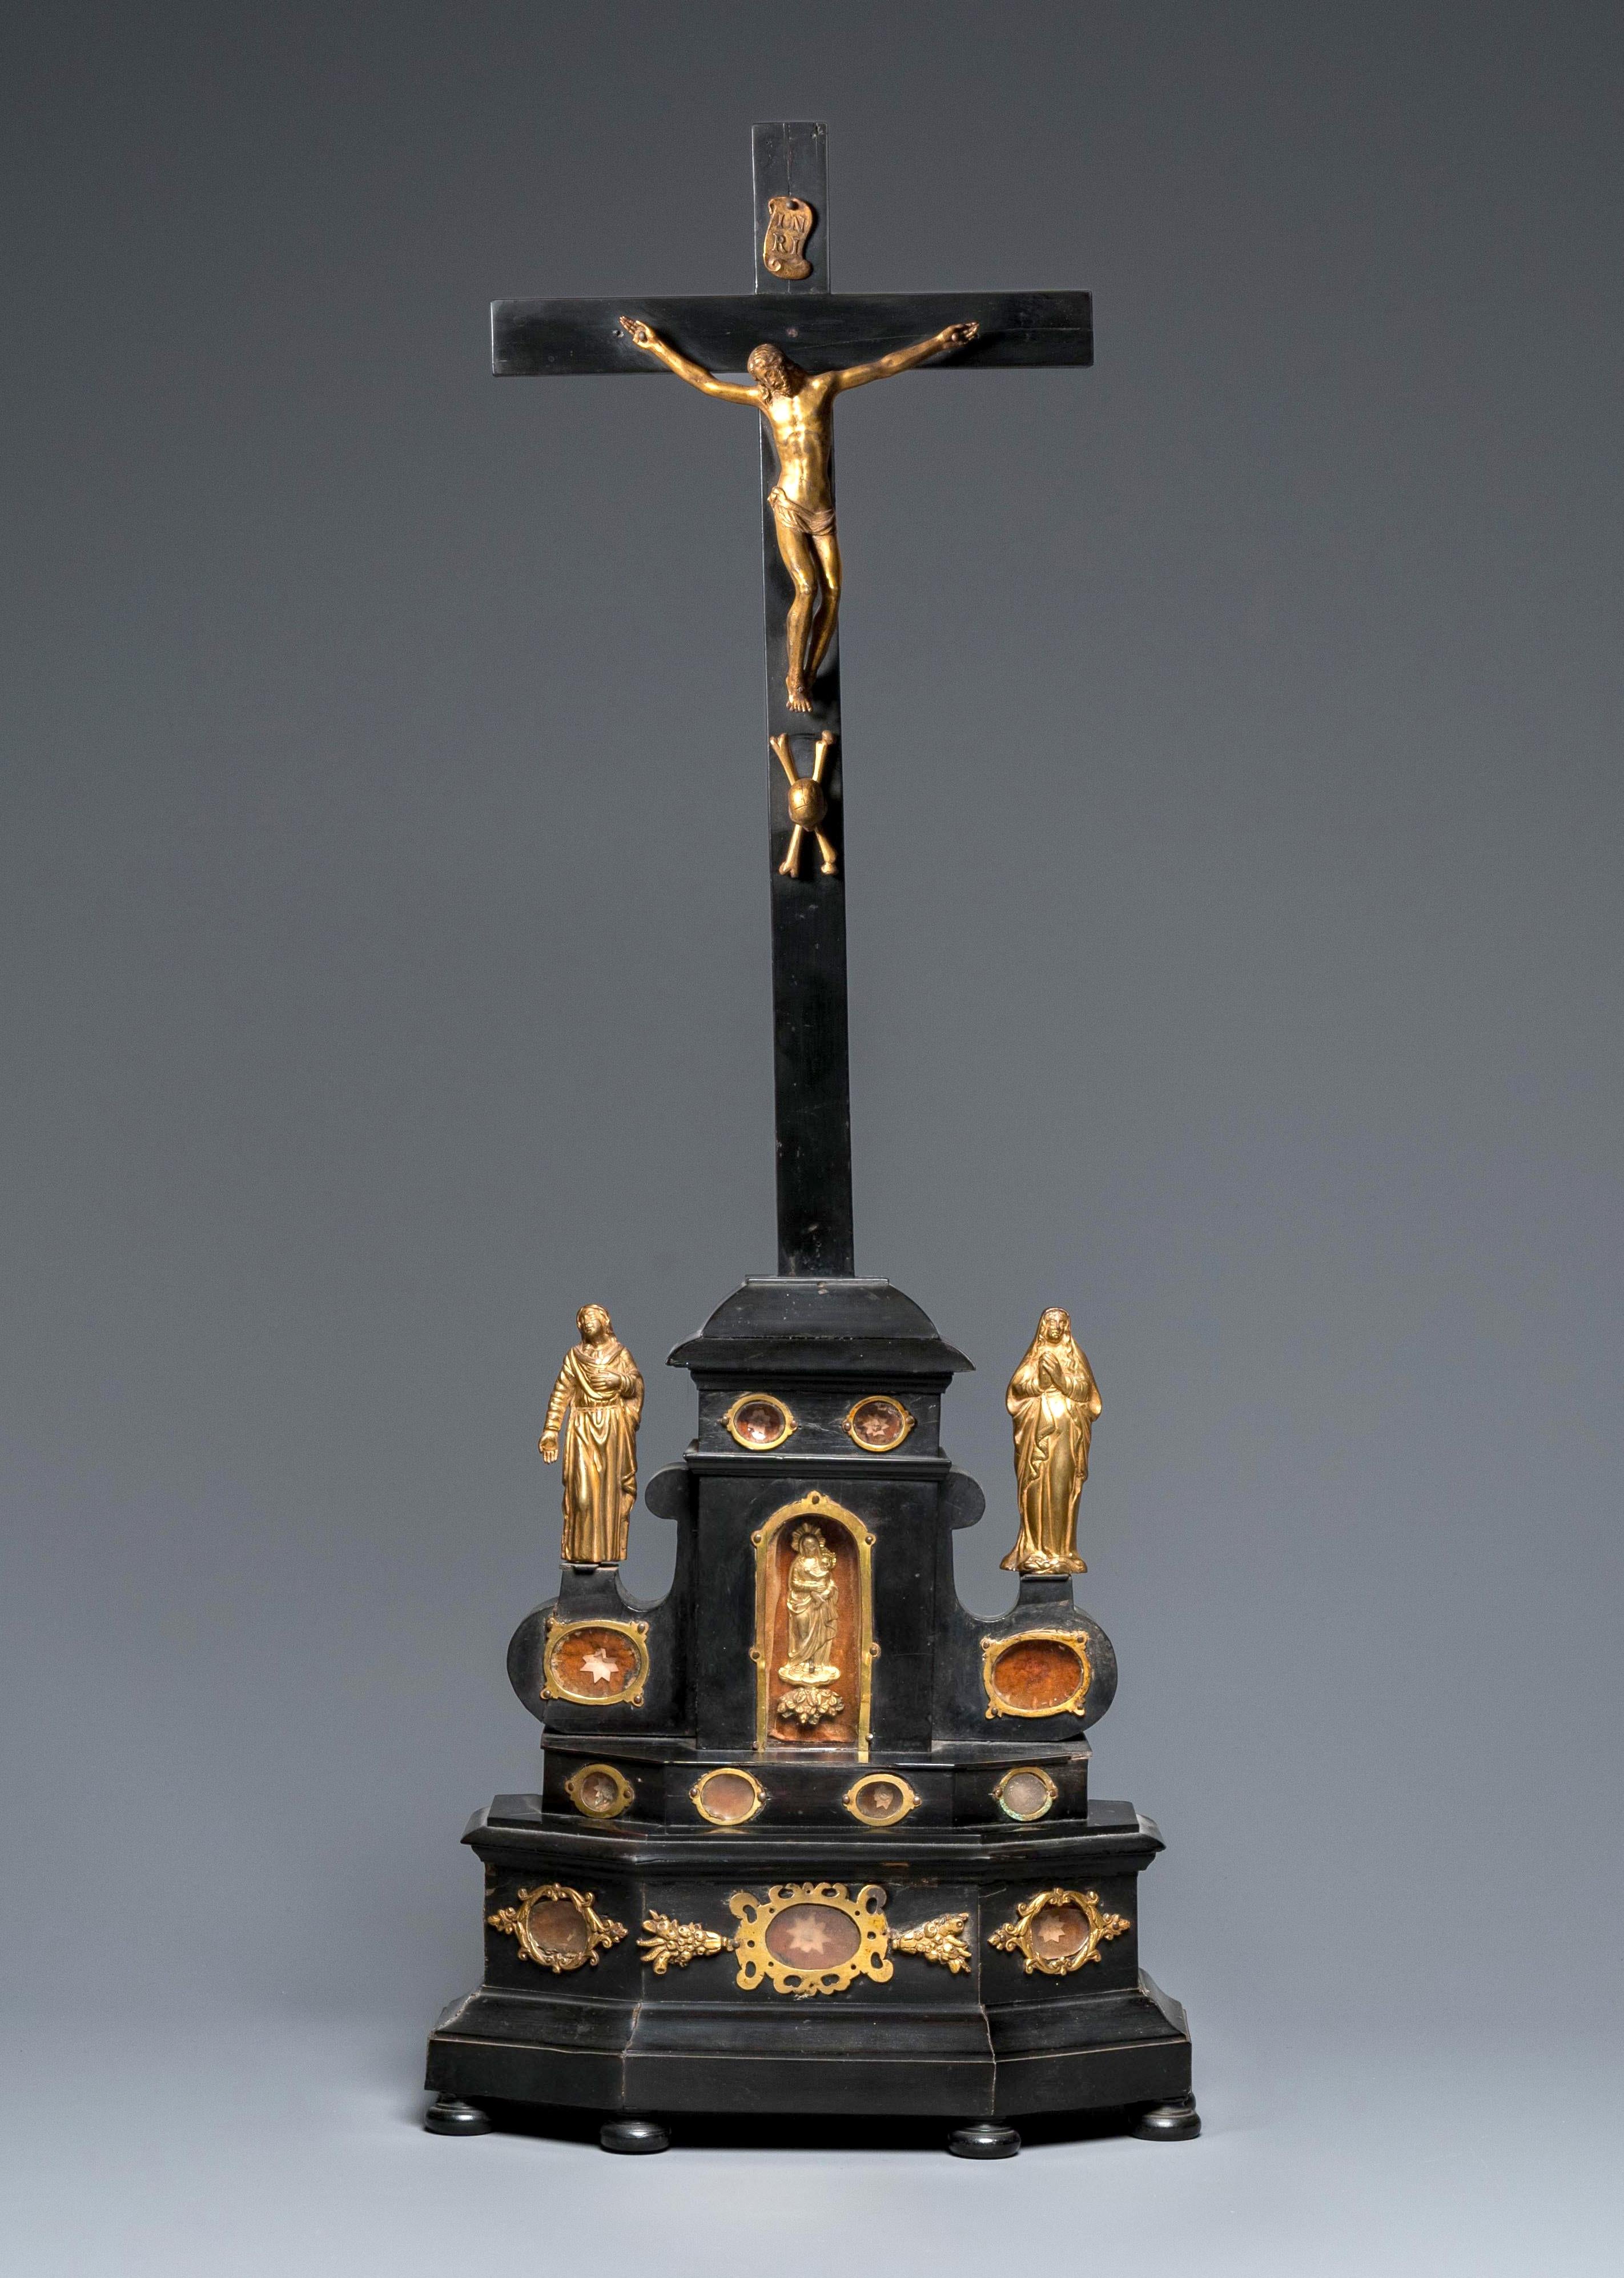 Anonymous (corpus after a model by Giambologna)
circa 1700; Netherlandish or Northern Rhinish
Ebonized wood, gilt bronze appliques and statuettes, textiles and relics

Approximate size: 75 cm (h)

The present altar cross features a gilt bronze